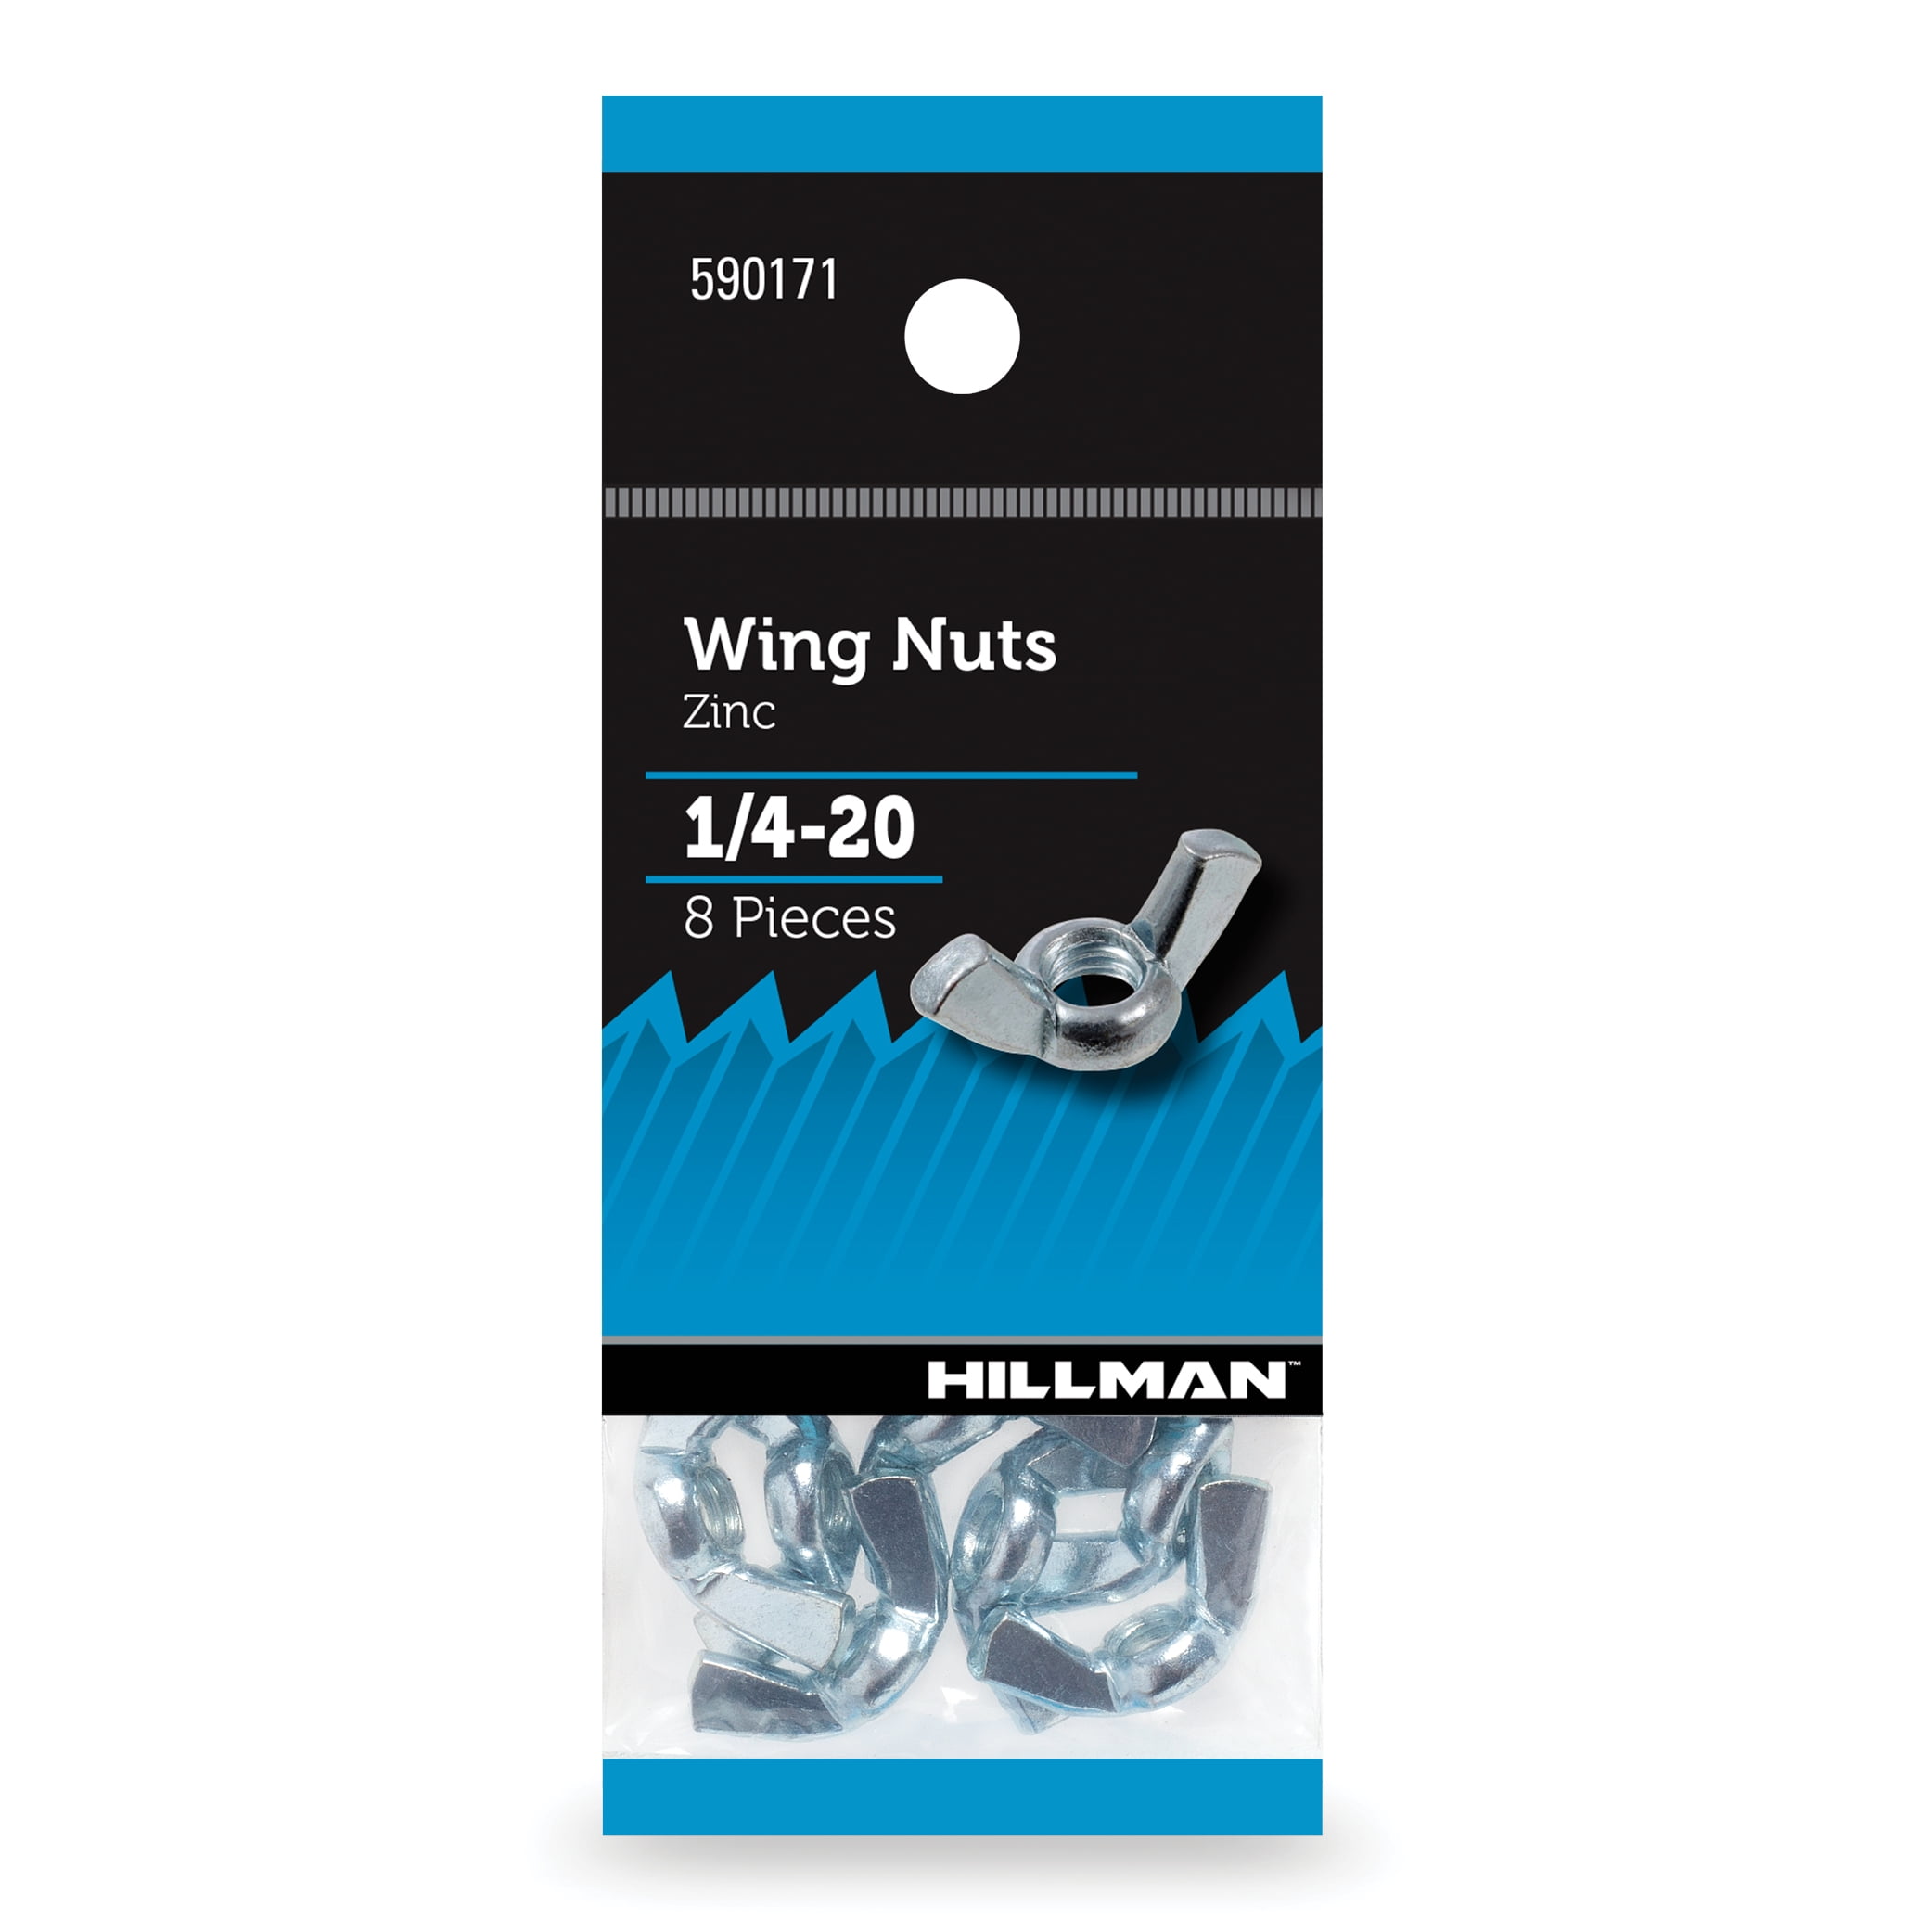 Hillman Wing Nuts, 1/4-20, Tool Free, Zinc Plated, Steel, Pack of 8